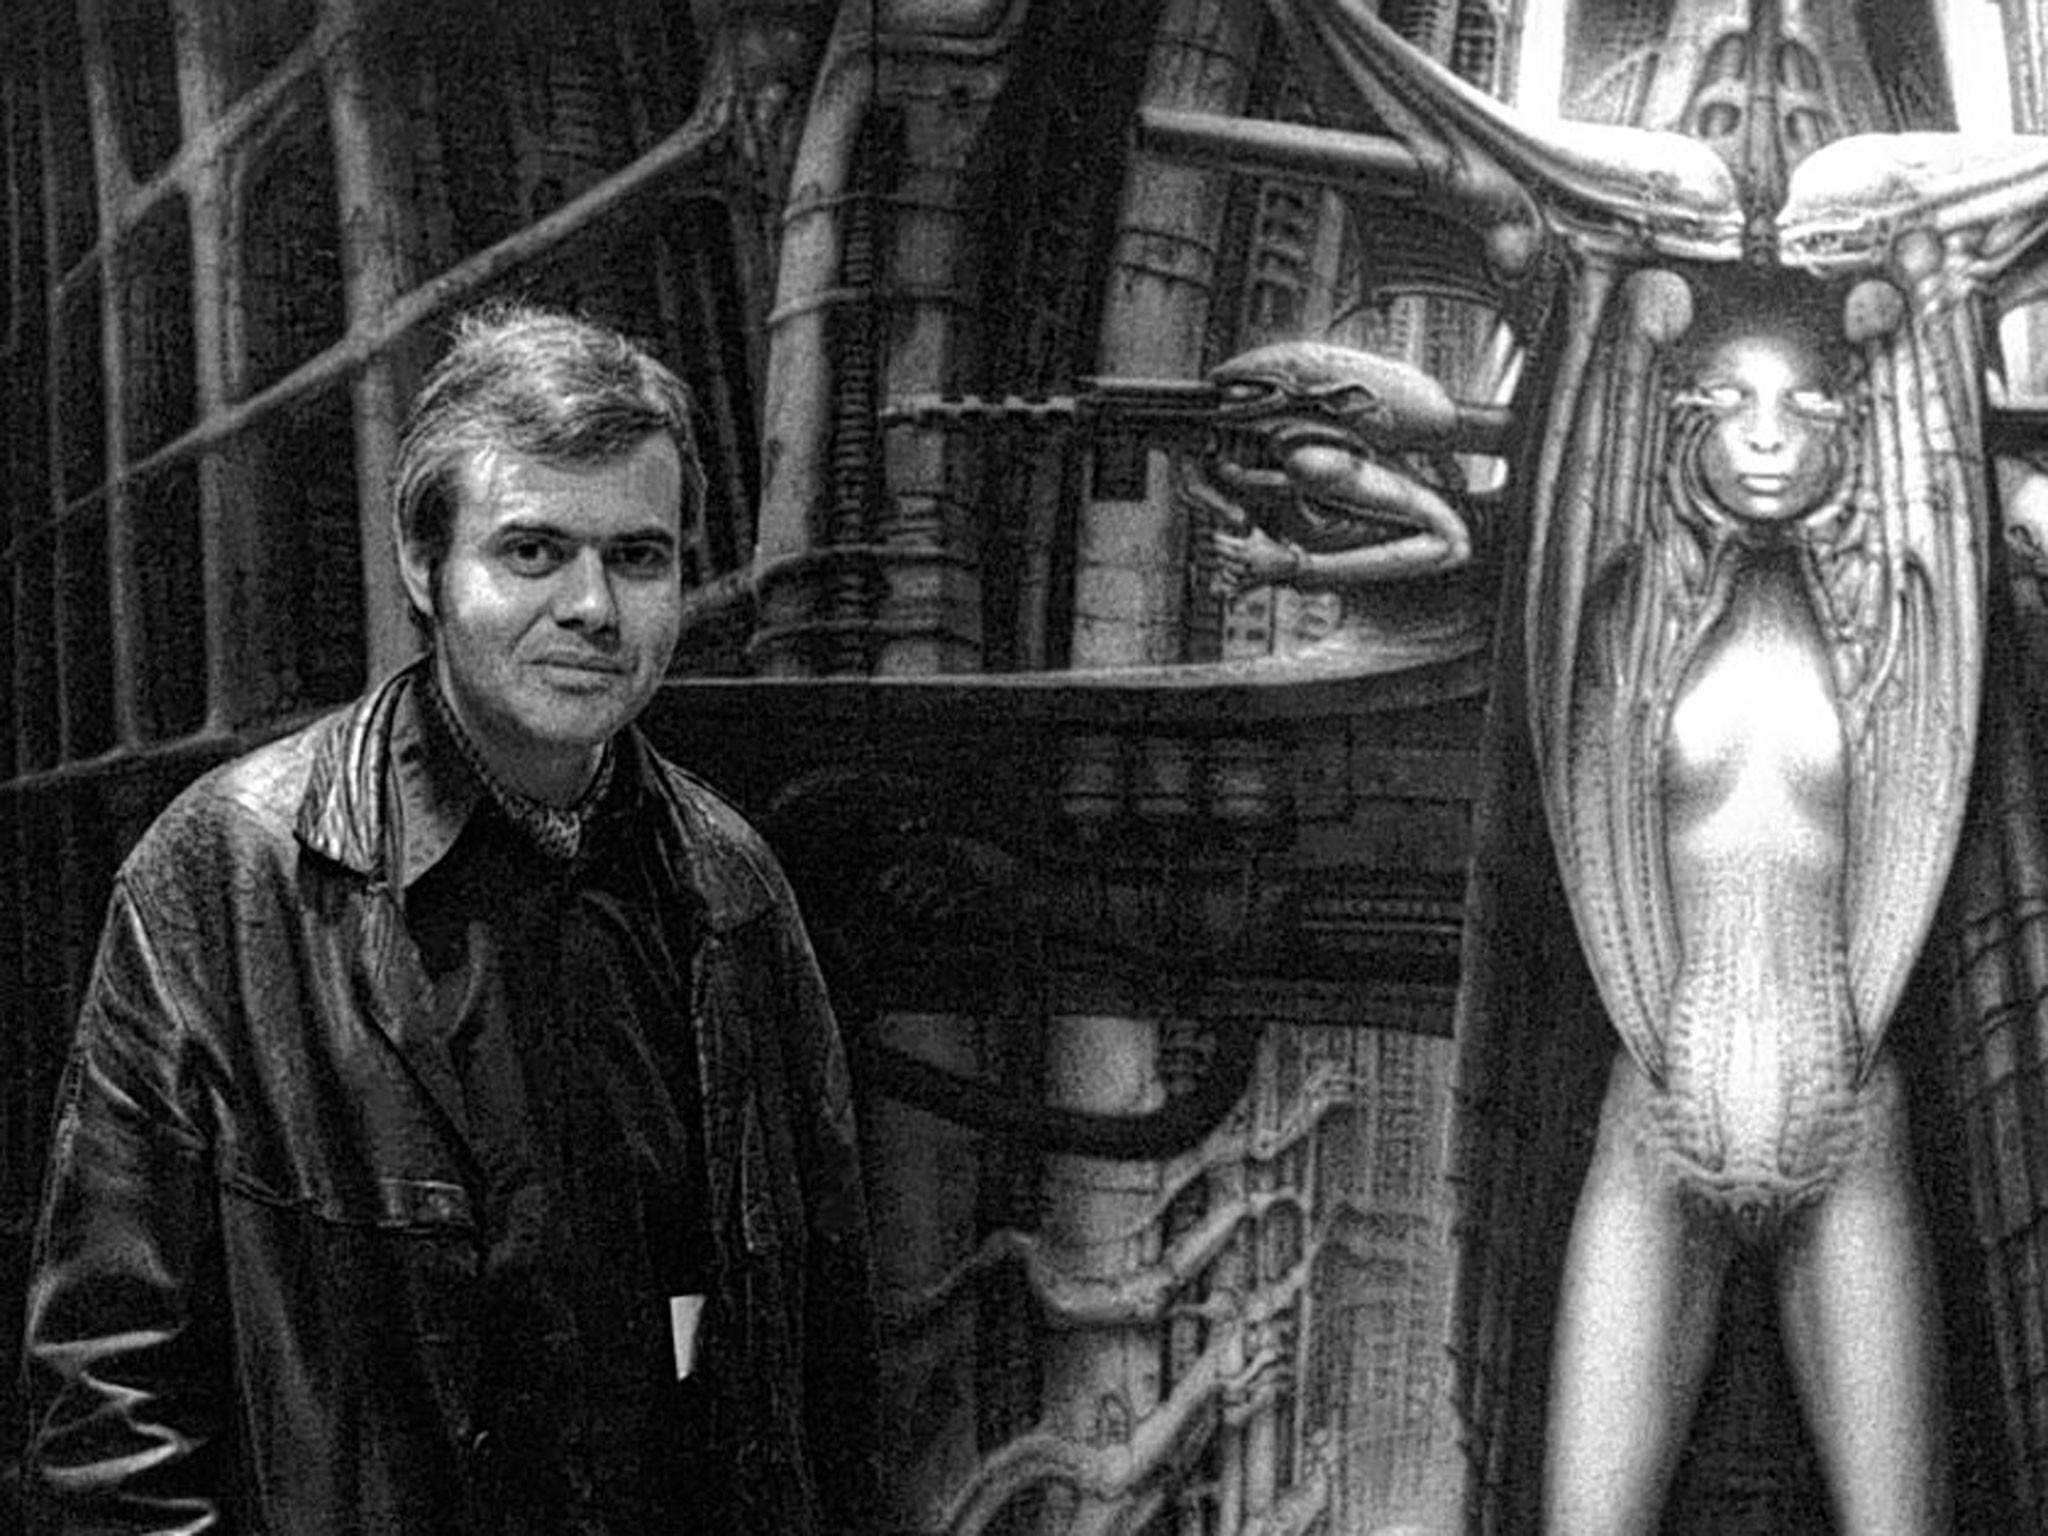 HR Giger Artist hailed for his surrealistic creatures in nightmare landscapes who won an Oscar for his work on Alien The Independent